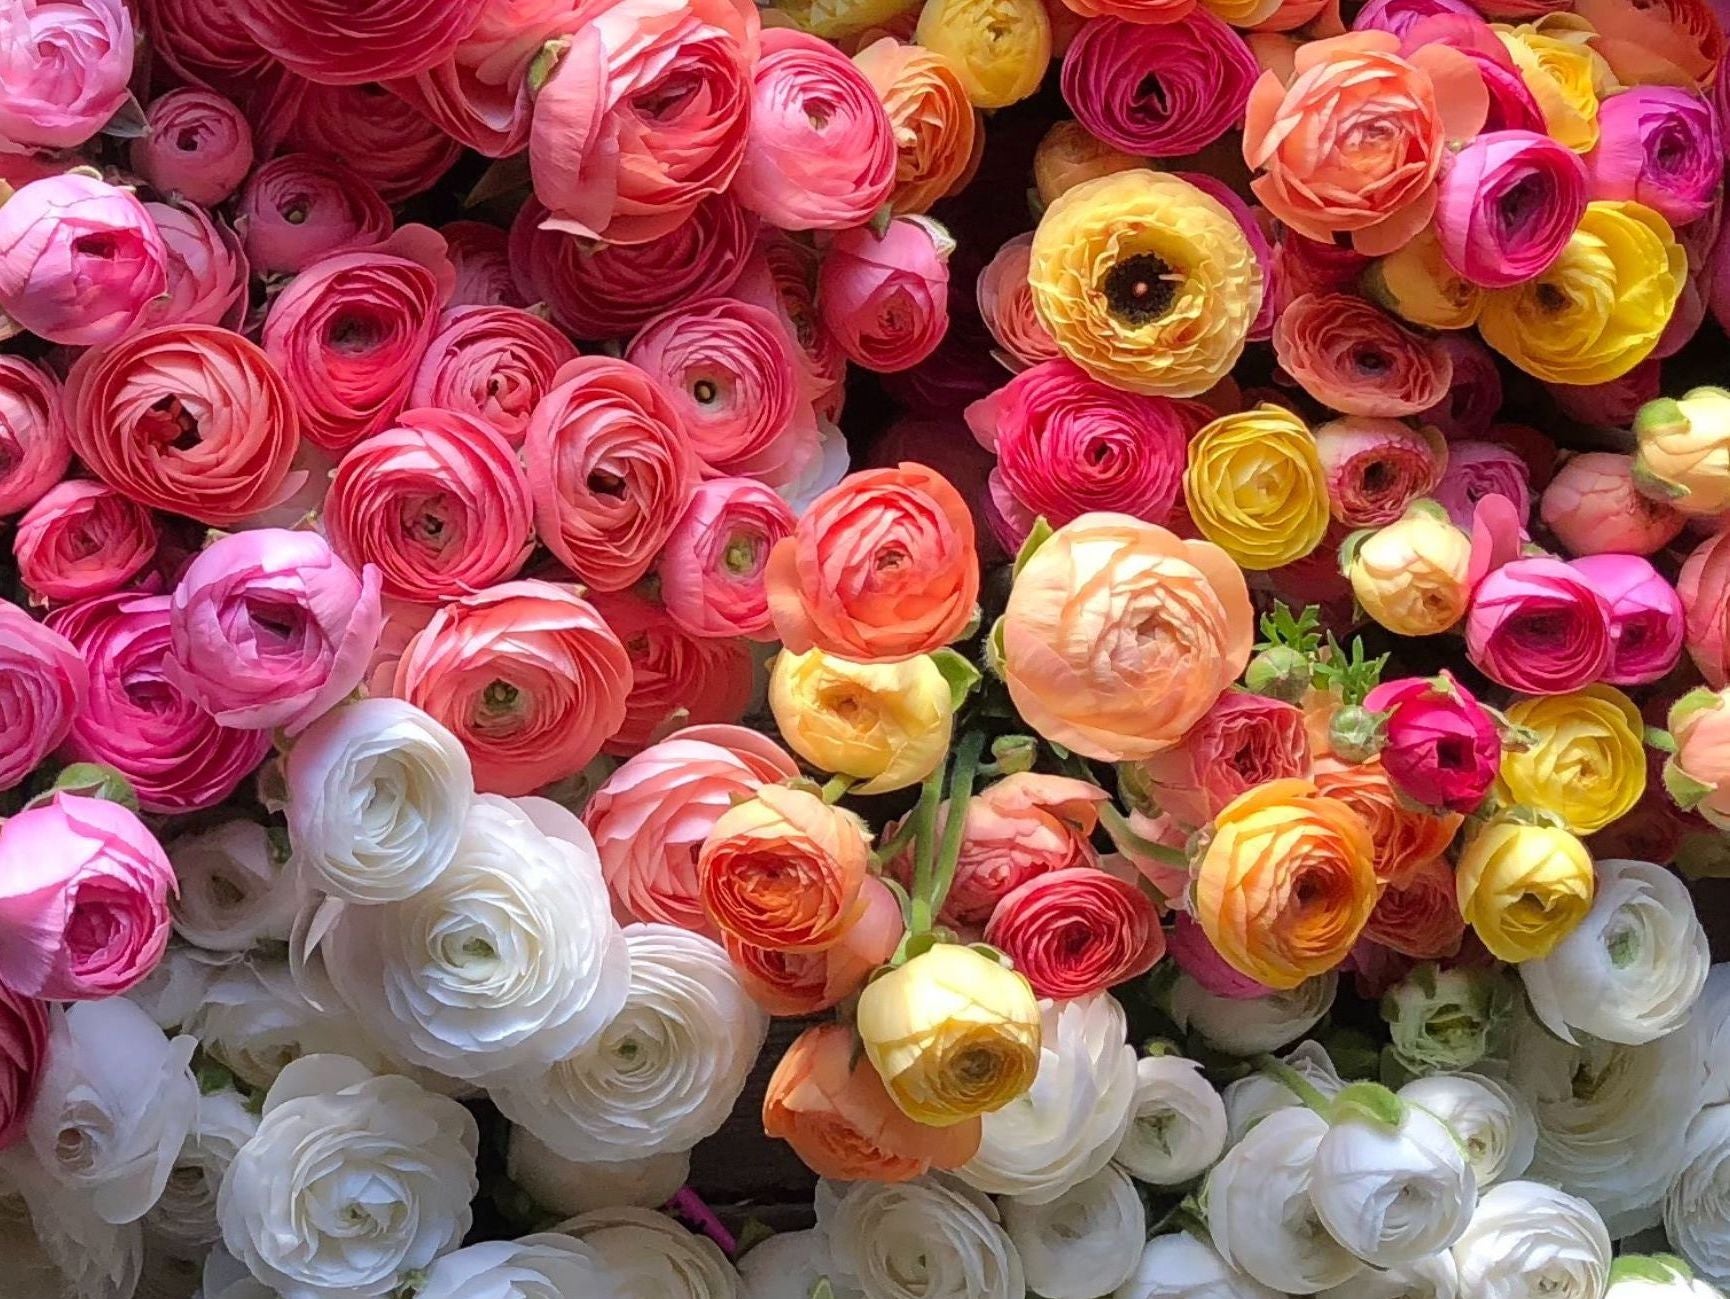 Growing Ranunculus in a Cold Climate: Tips for Success in Zones 5-6